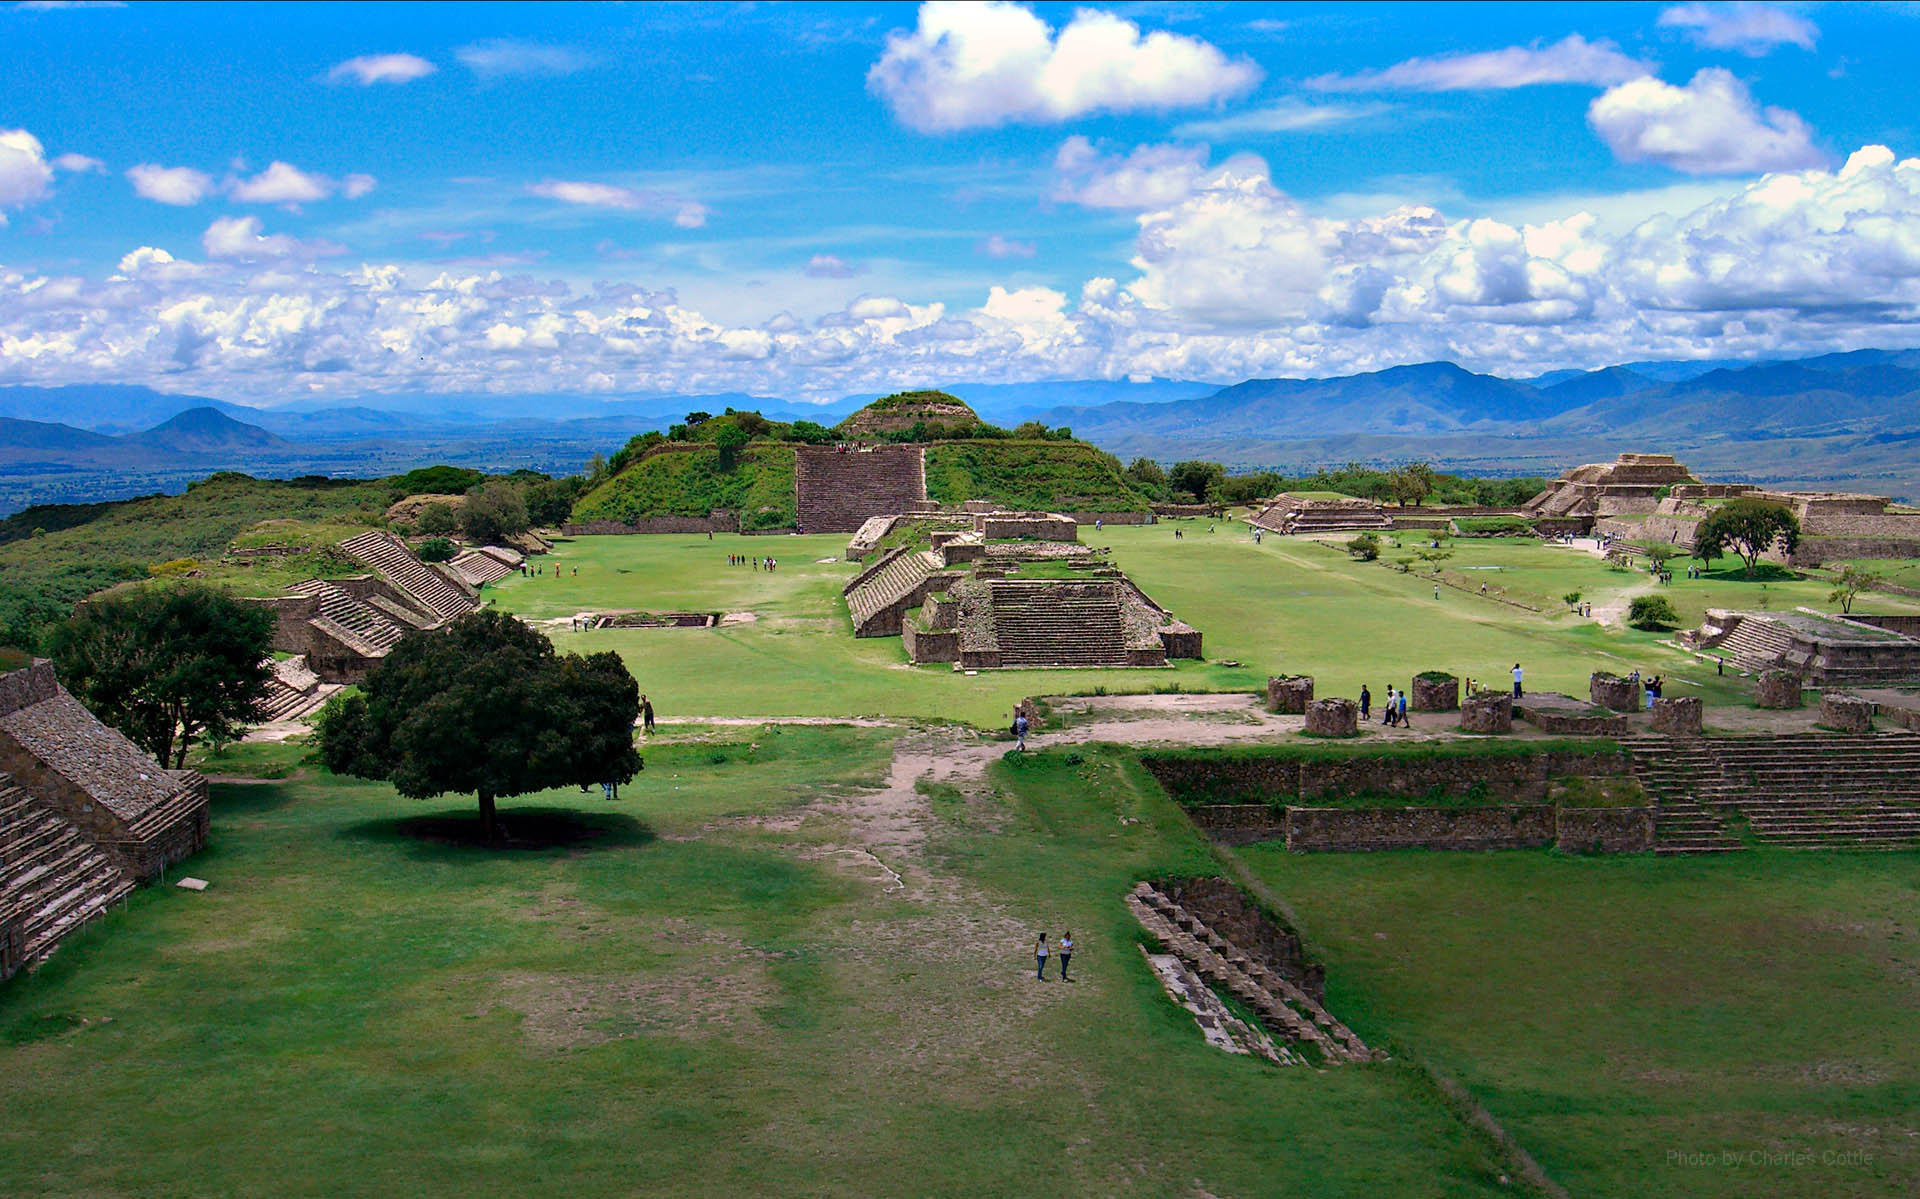 A view from on high above Monte Albán, one of the major archaeological sites in Mesoamerica.